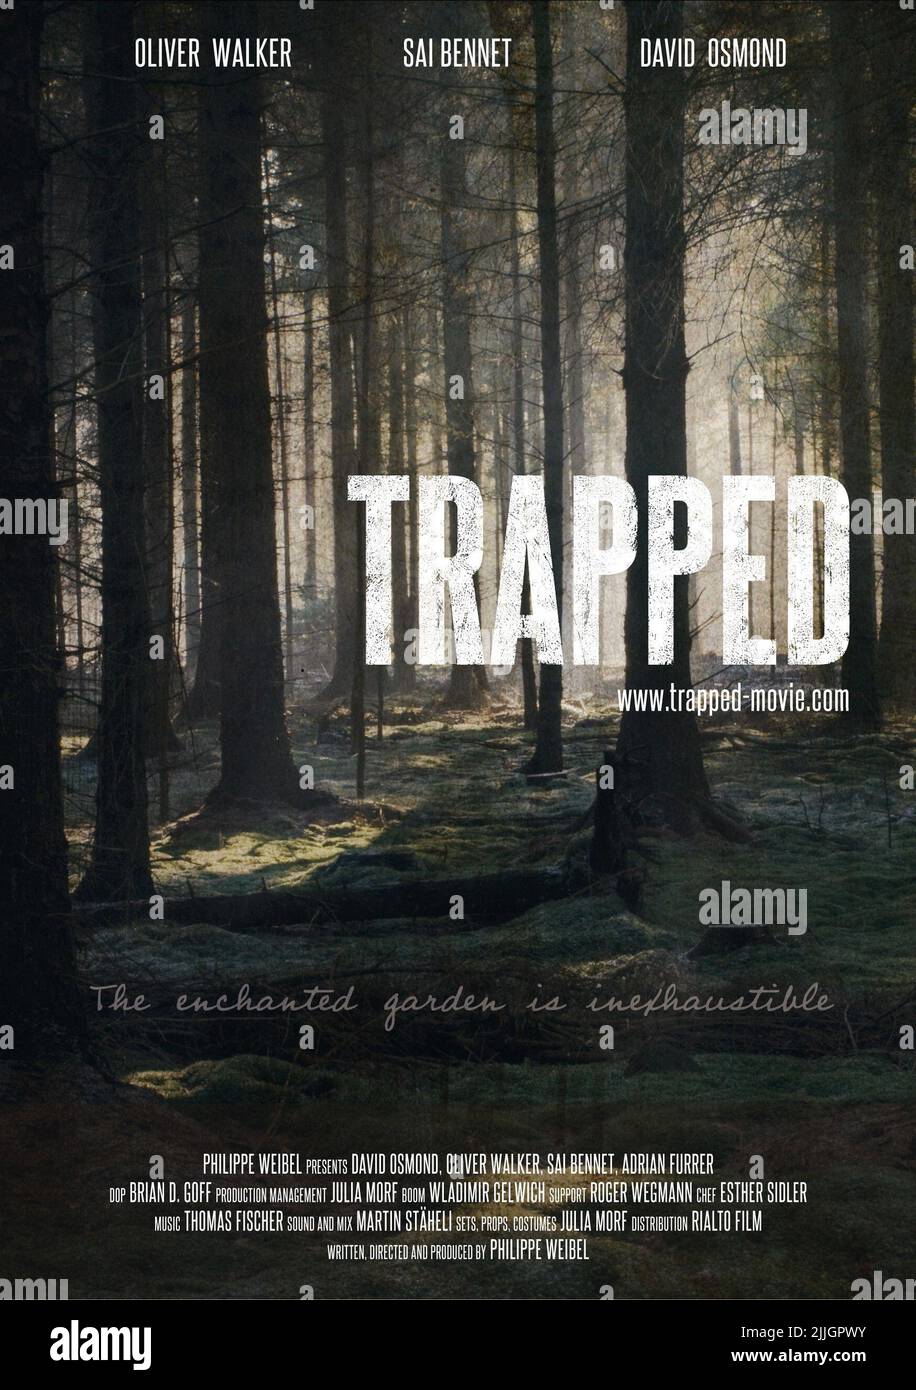 MOVIE POSTER, TRAPPED, 2012 Stock Photo - Alamy